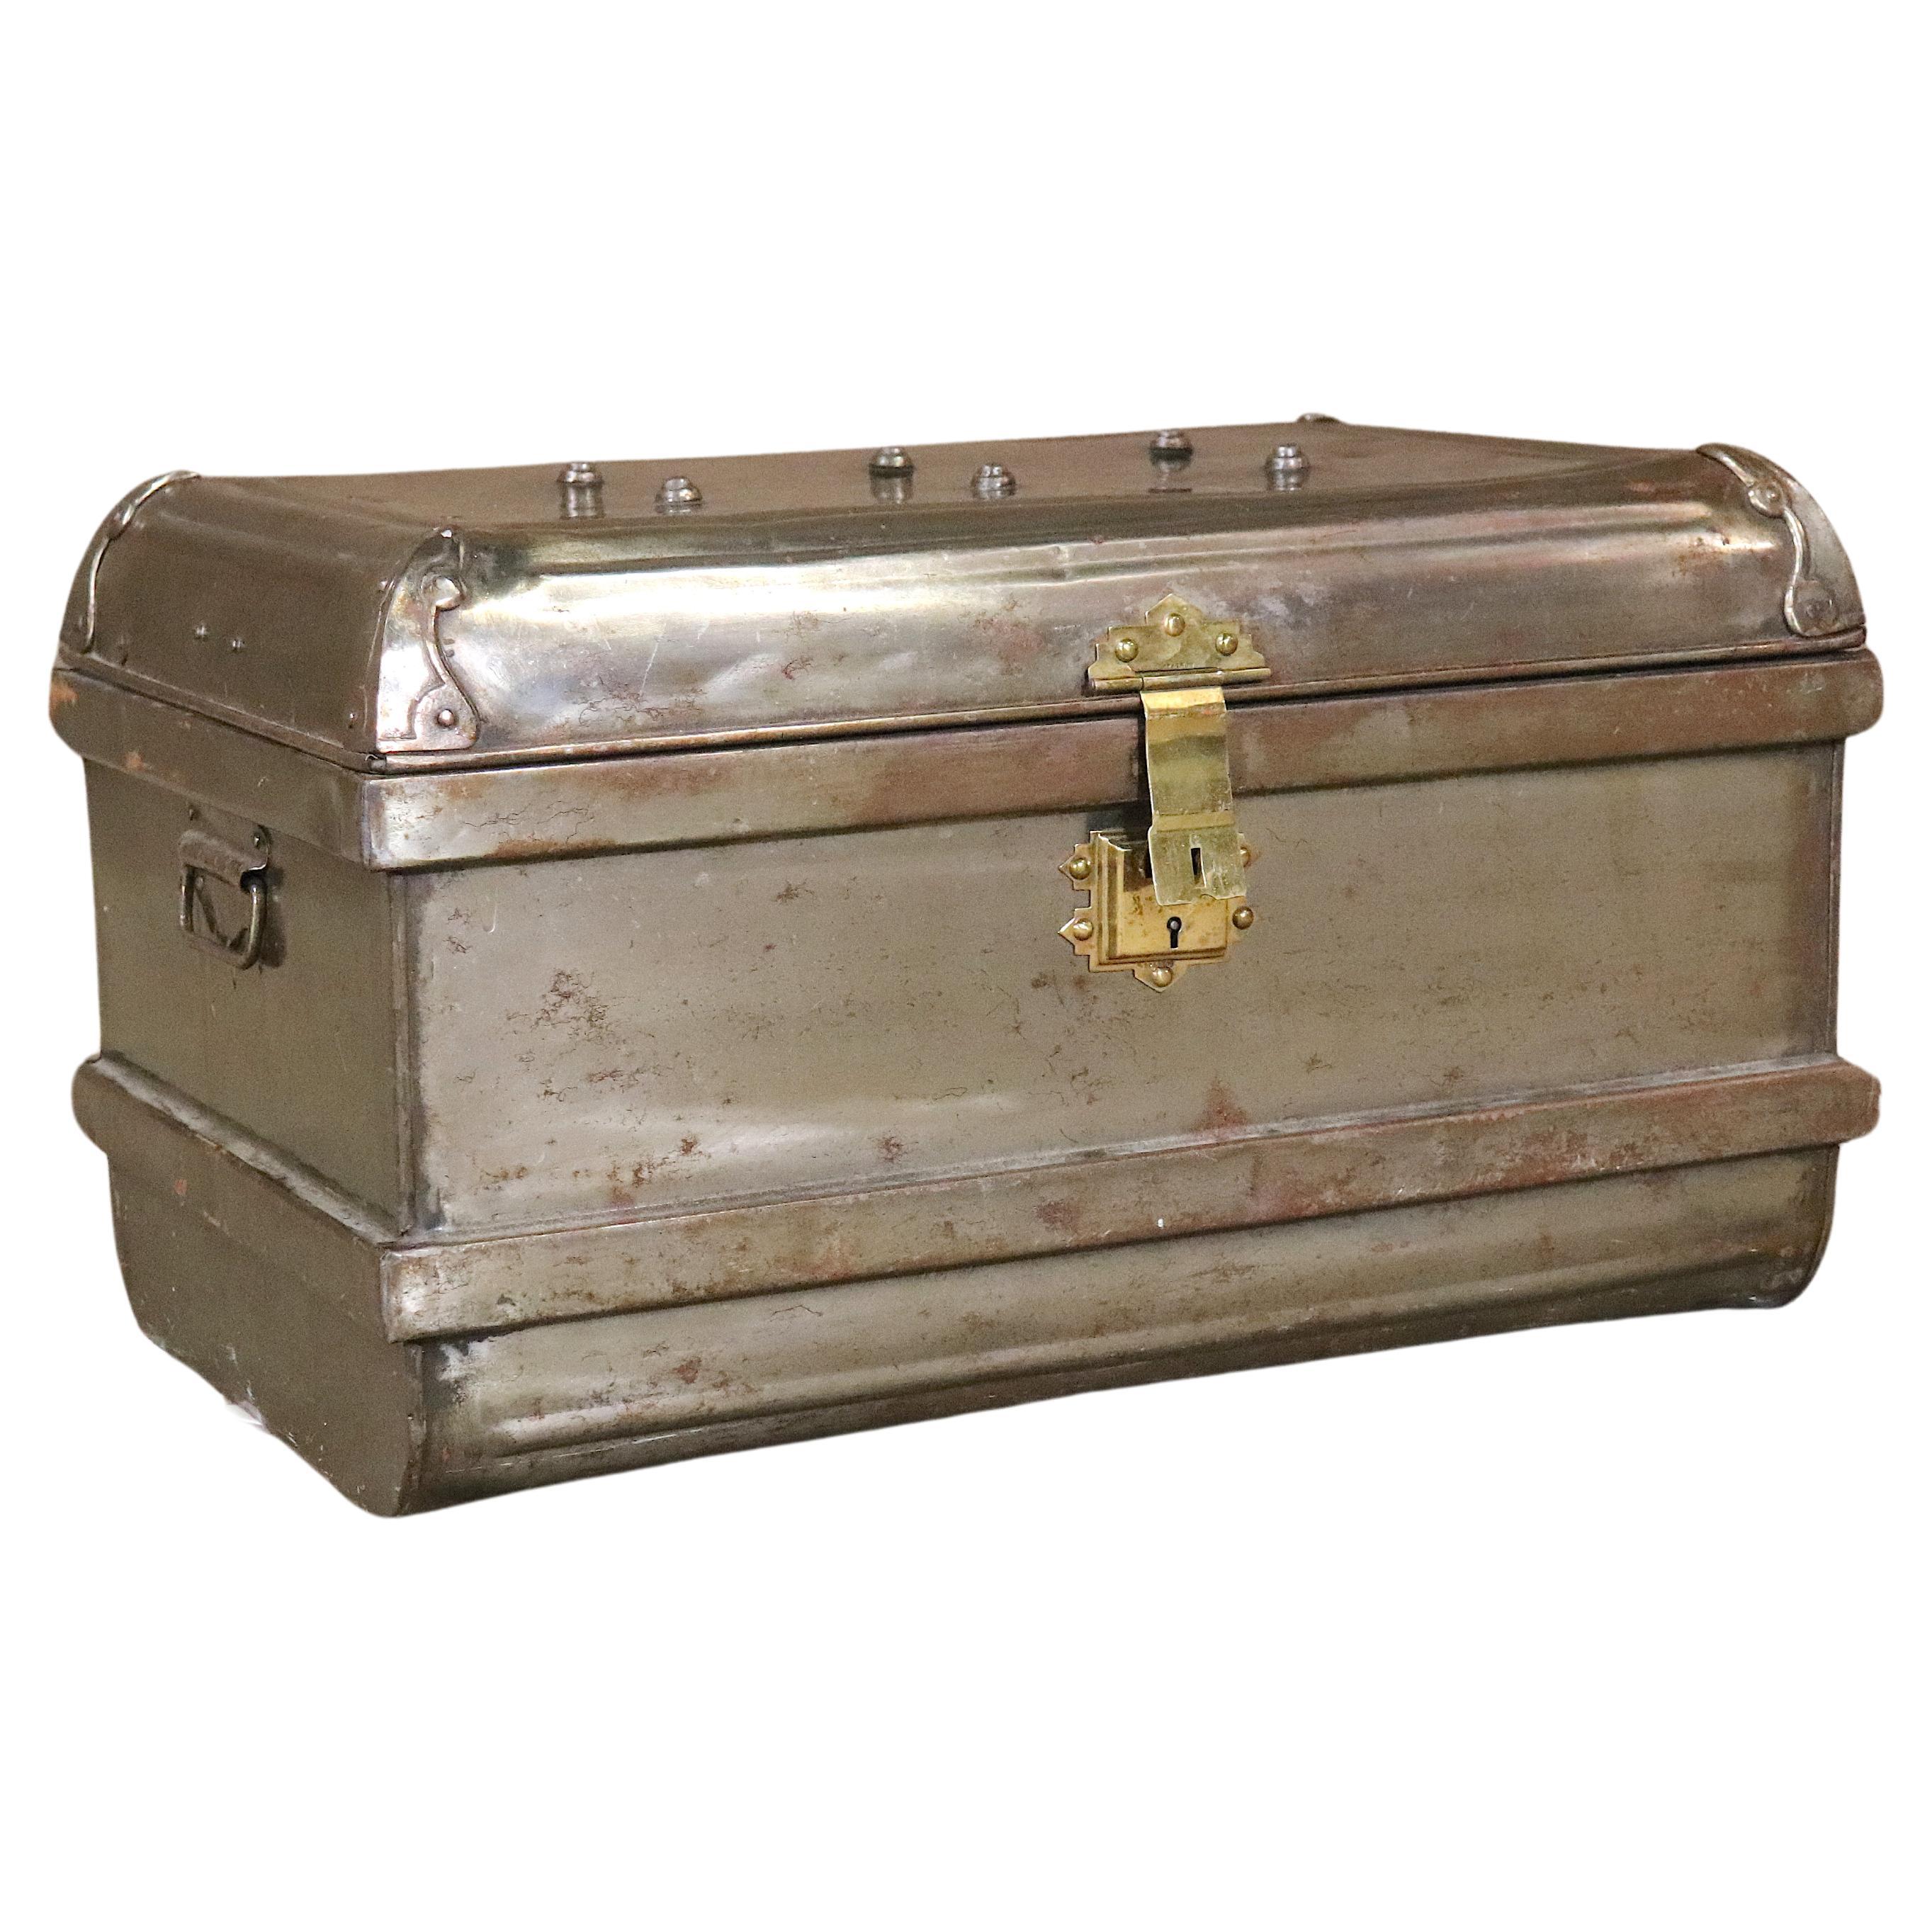 This industrial looking metal flip top trunk sports a brass latch, corner clamps, metal handles, rivets on the lid surface, painted black interior, and metal banding around the base and mid-section. Stylish storage solution for your modern home.